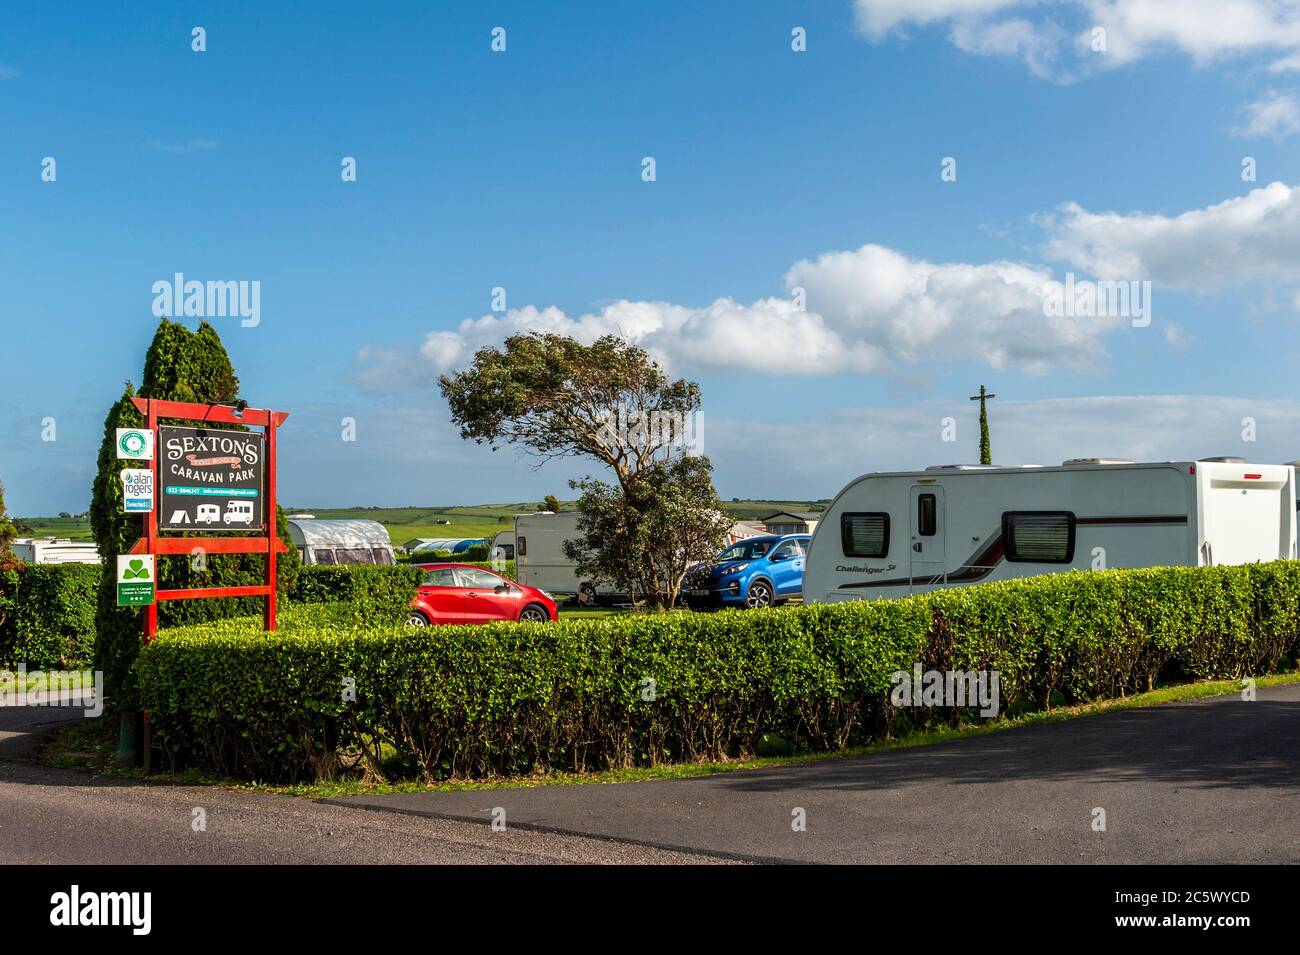 Timoleague, West Cork, Ireland. 5th July, 2020. Sexton's Caravan Park in Timoleague was full of caravans, motor homes and tents this weekend after reopening on Monday 29th June for the first time this year. Credit: AG News/Alamy Live News Stock Photo